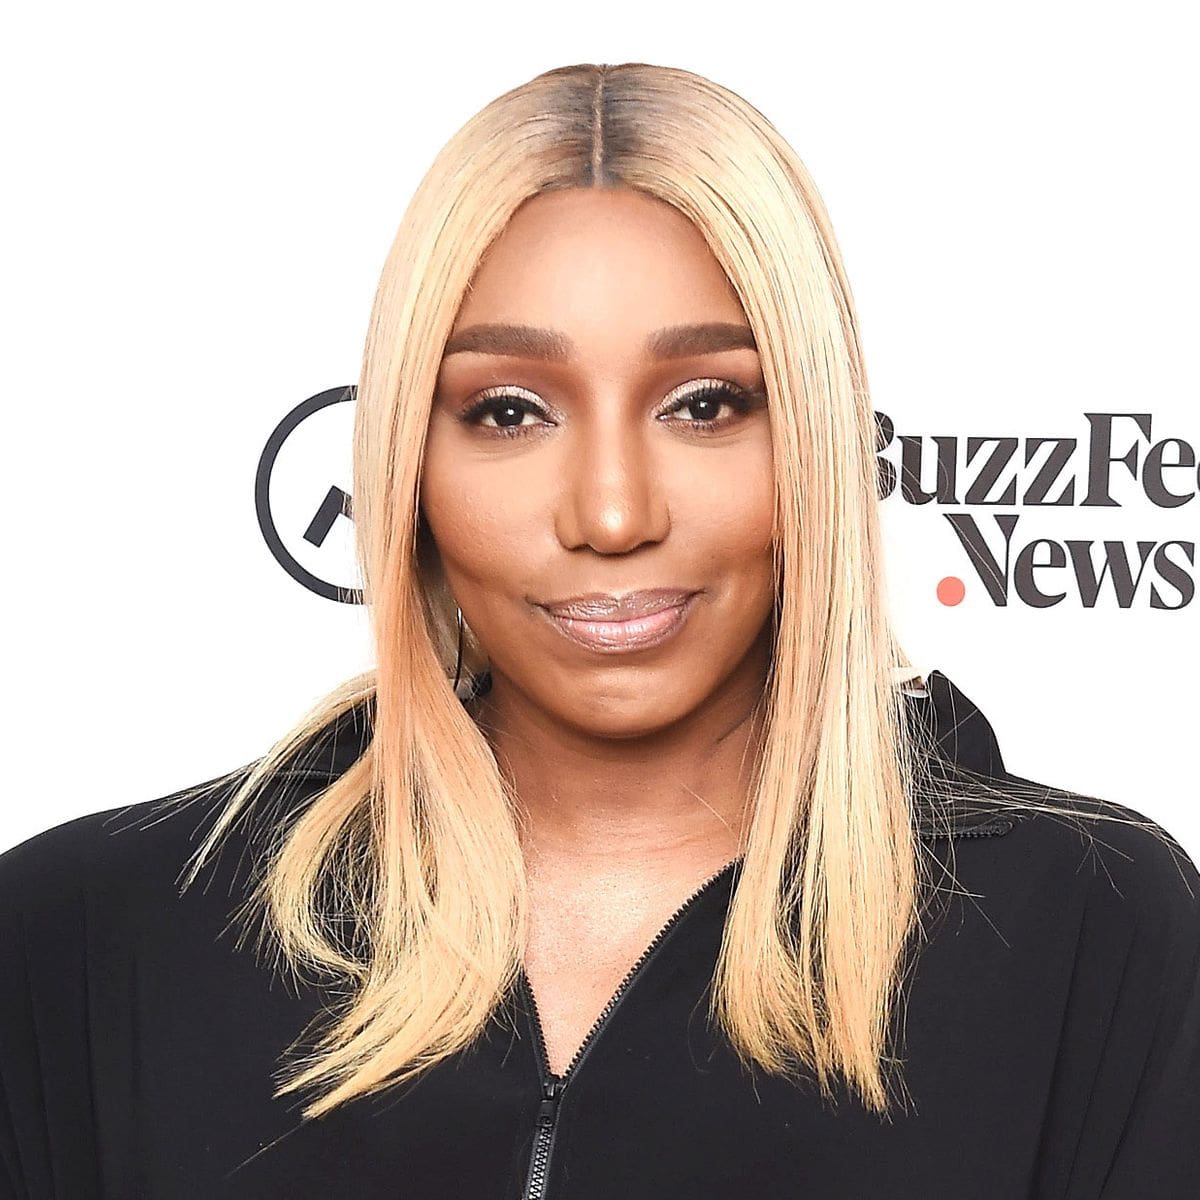 ”nene-leakes-latest-video-has-fans-gushing-over-her-in-the-comments”